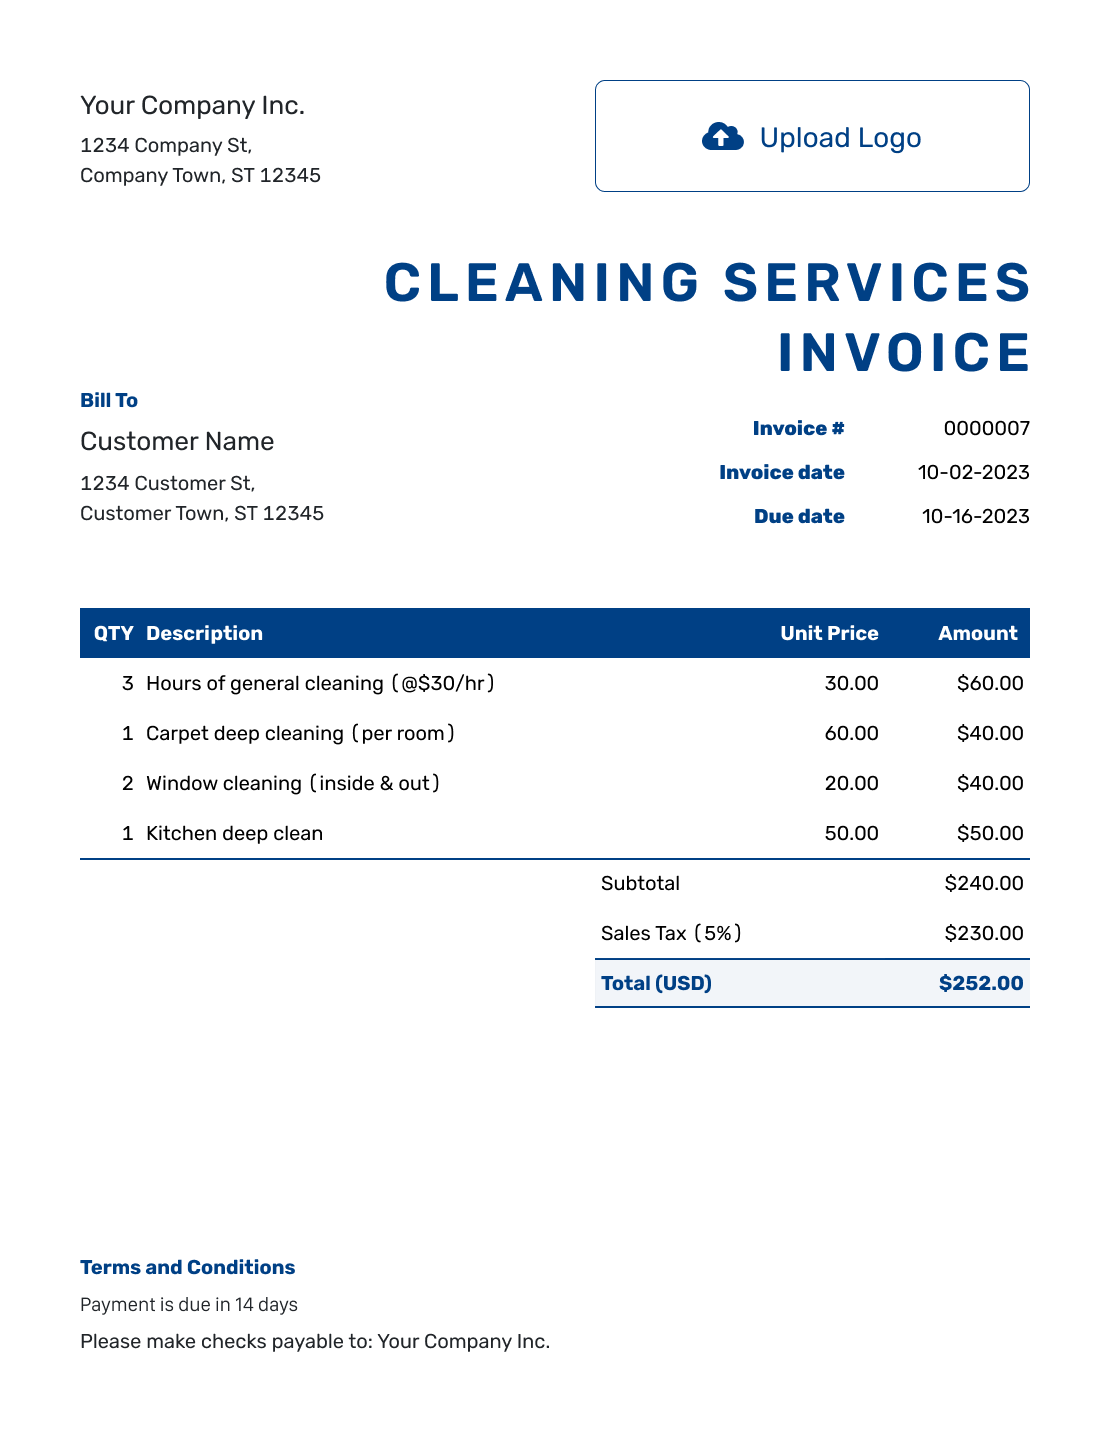 Sample Cleaning Services Invoice Template